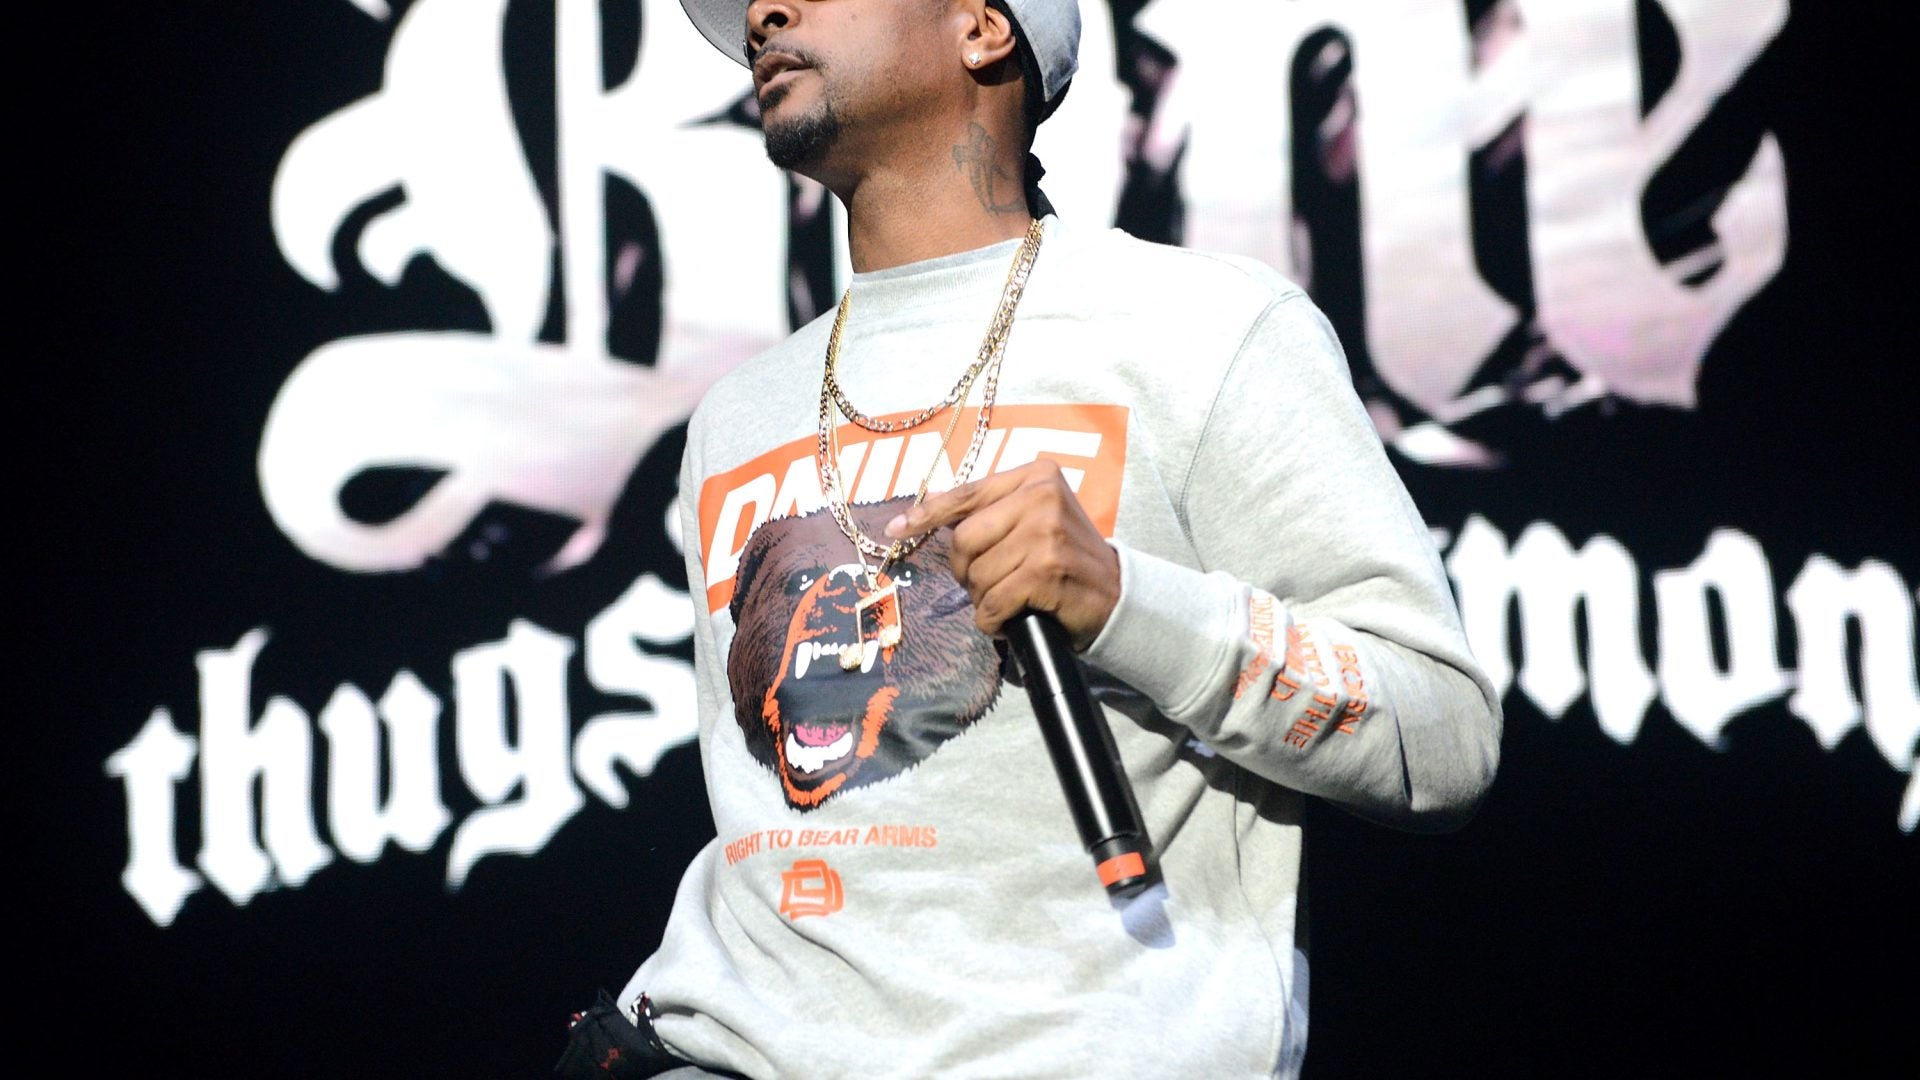 Health Update: Krayzie Bone Revealed He Fought For His Life For 9 Days Straight